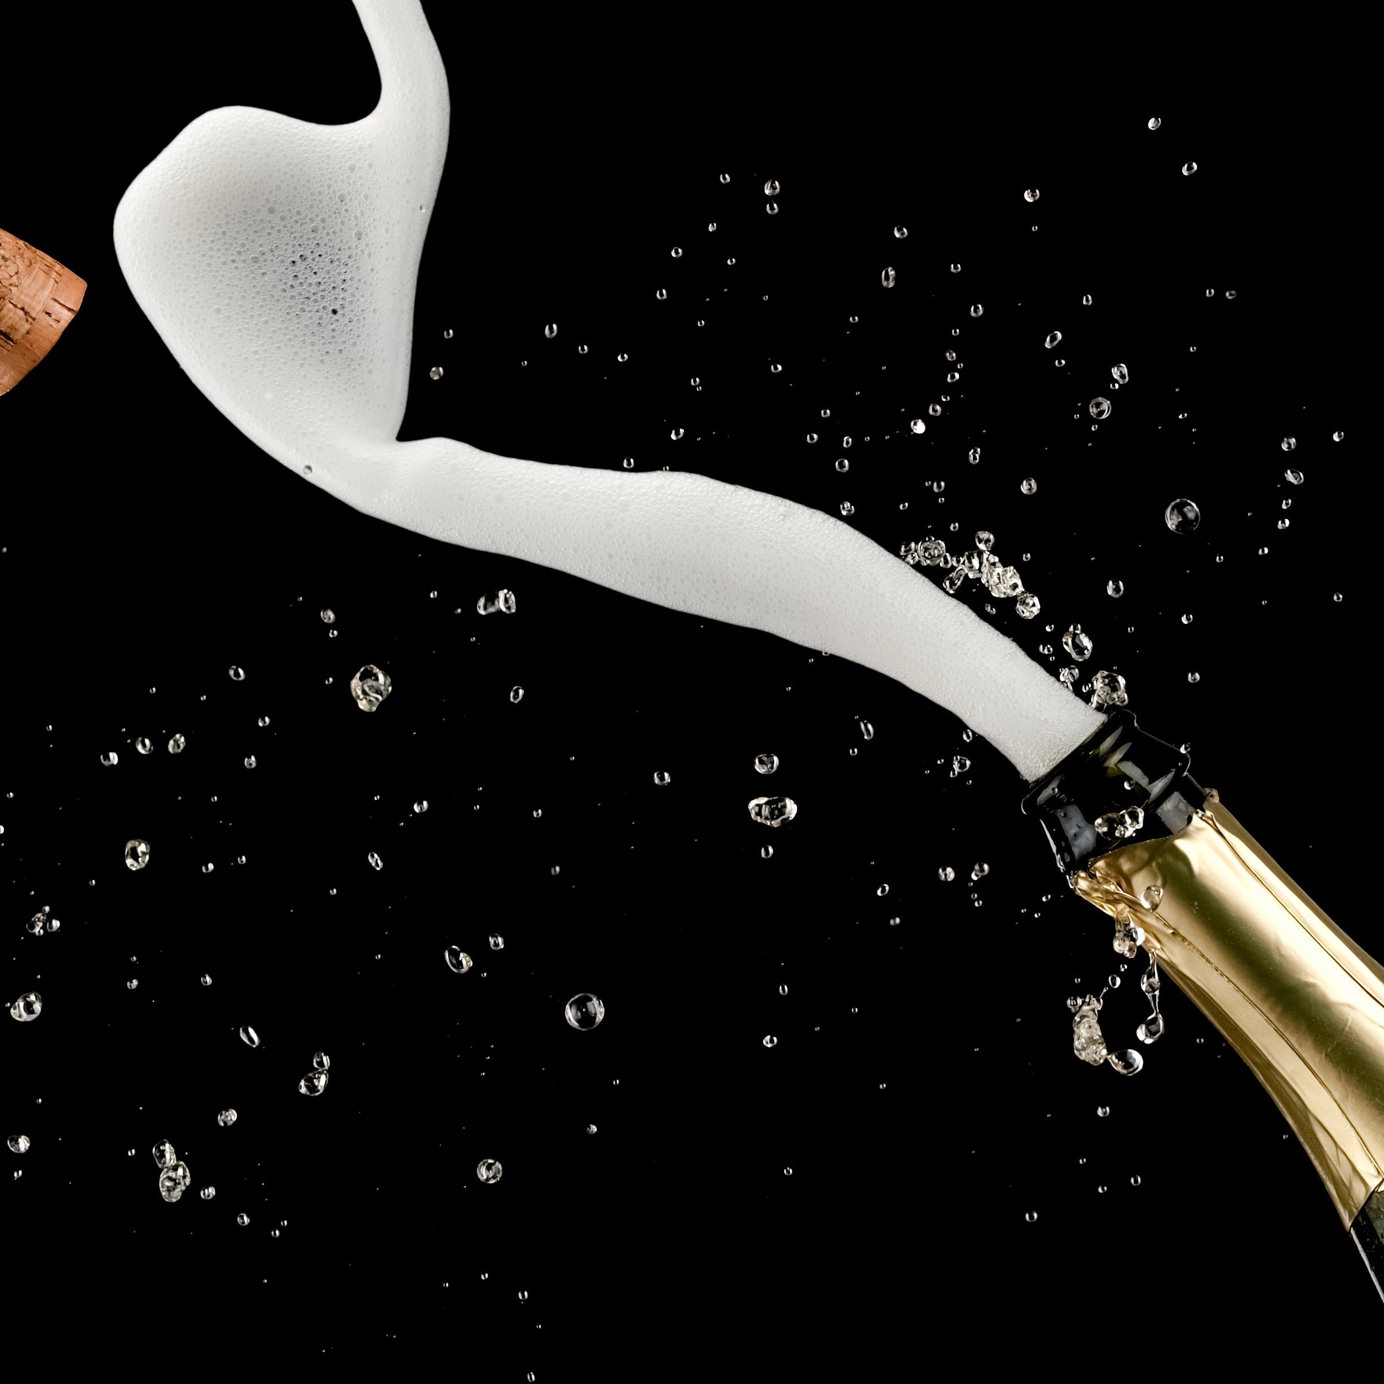 Champagne Toe-sts: The Strange History of Drinking Bubbly From Women’s Shoes